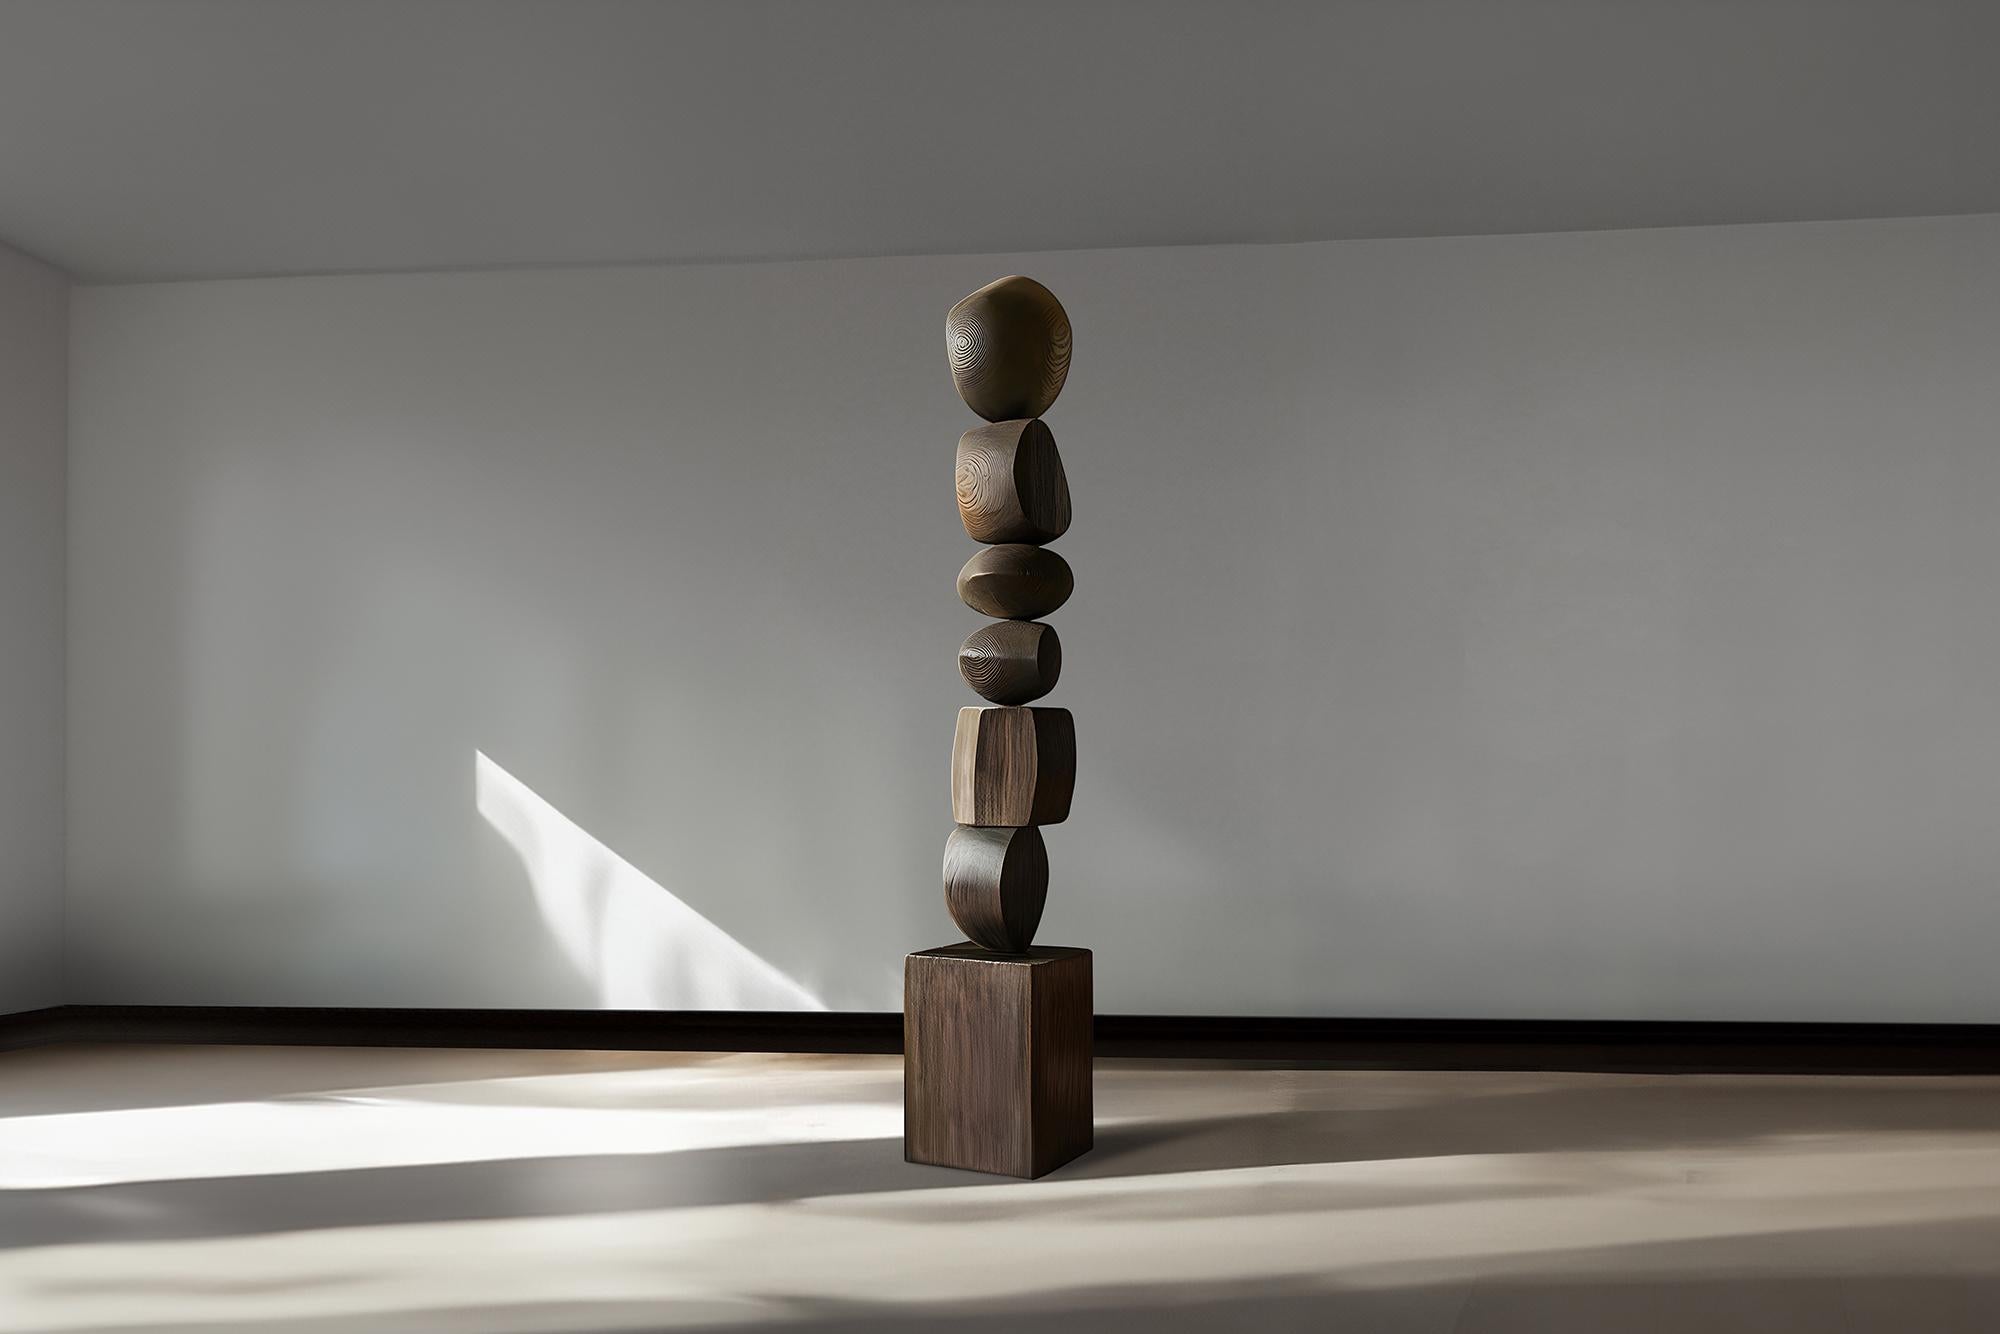 Biomorphic Burned Oak Elegance, Still Stand No83, Crafted by NONO
——


Joel Escalona's wooden standing sculptures are objects of raw beauty and serene grace. Each one is a testament to the power of the material, with smooth curves that flow into one